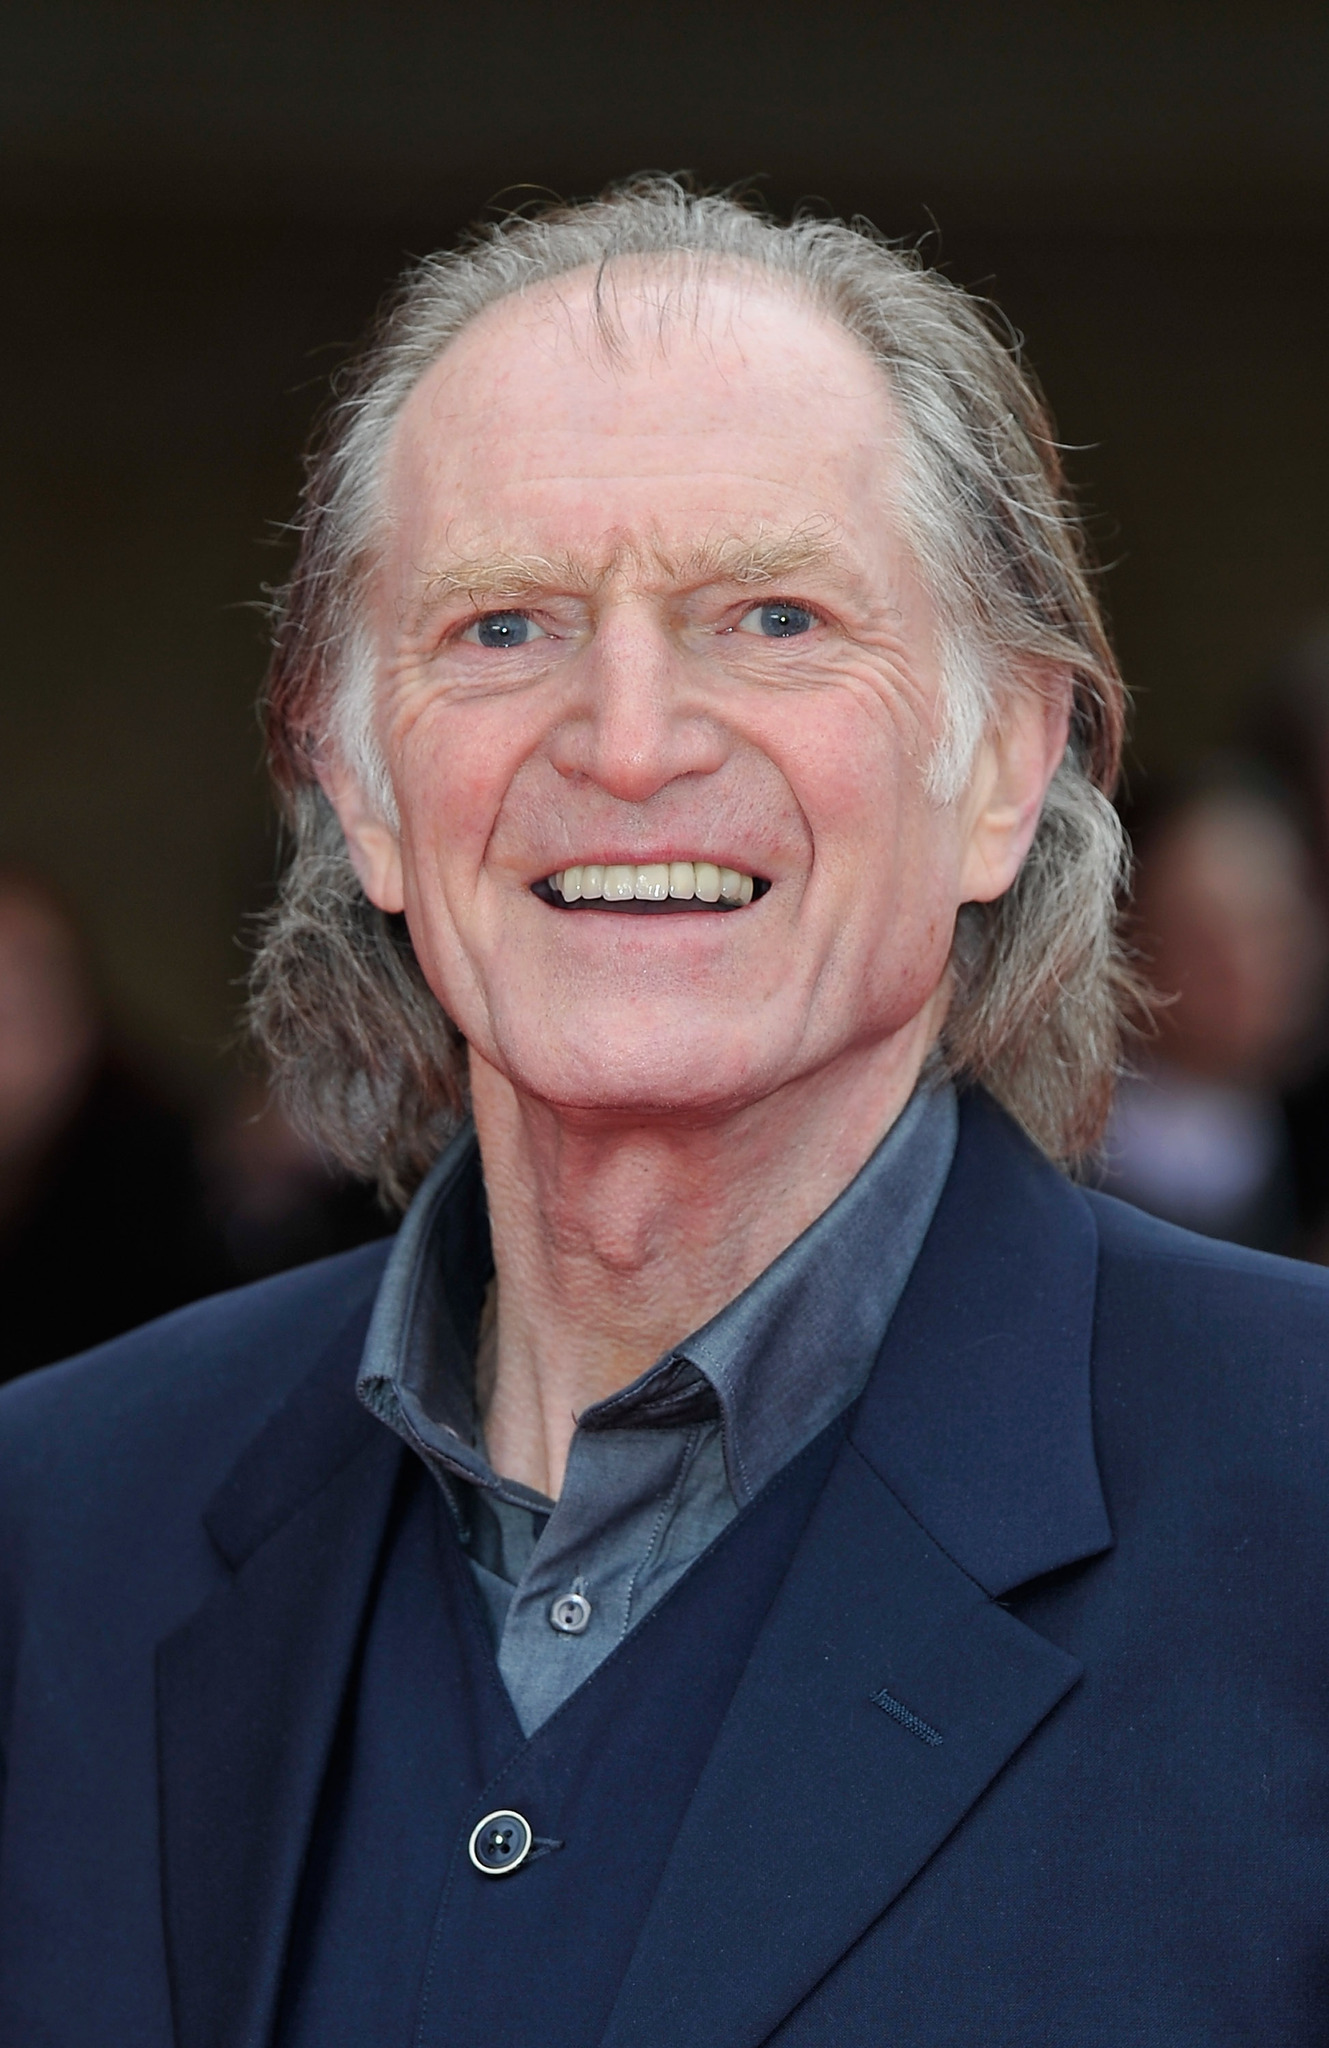 Who played Argus Filch in the Harry Potter franchise?